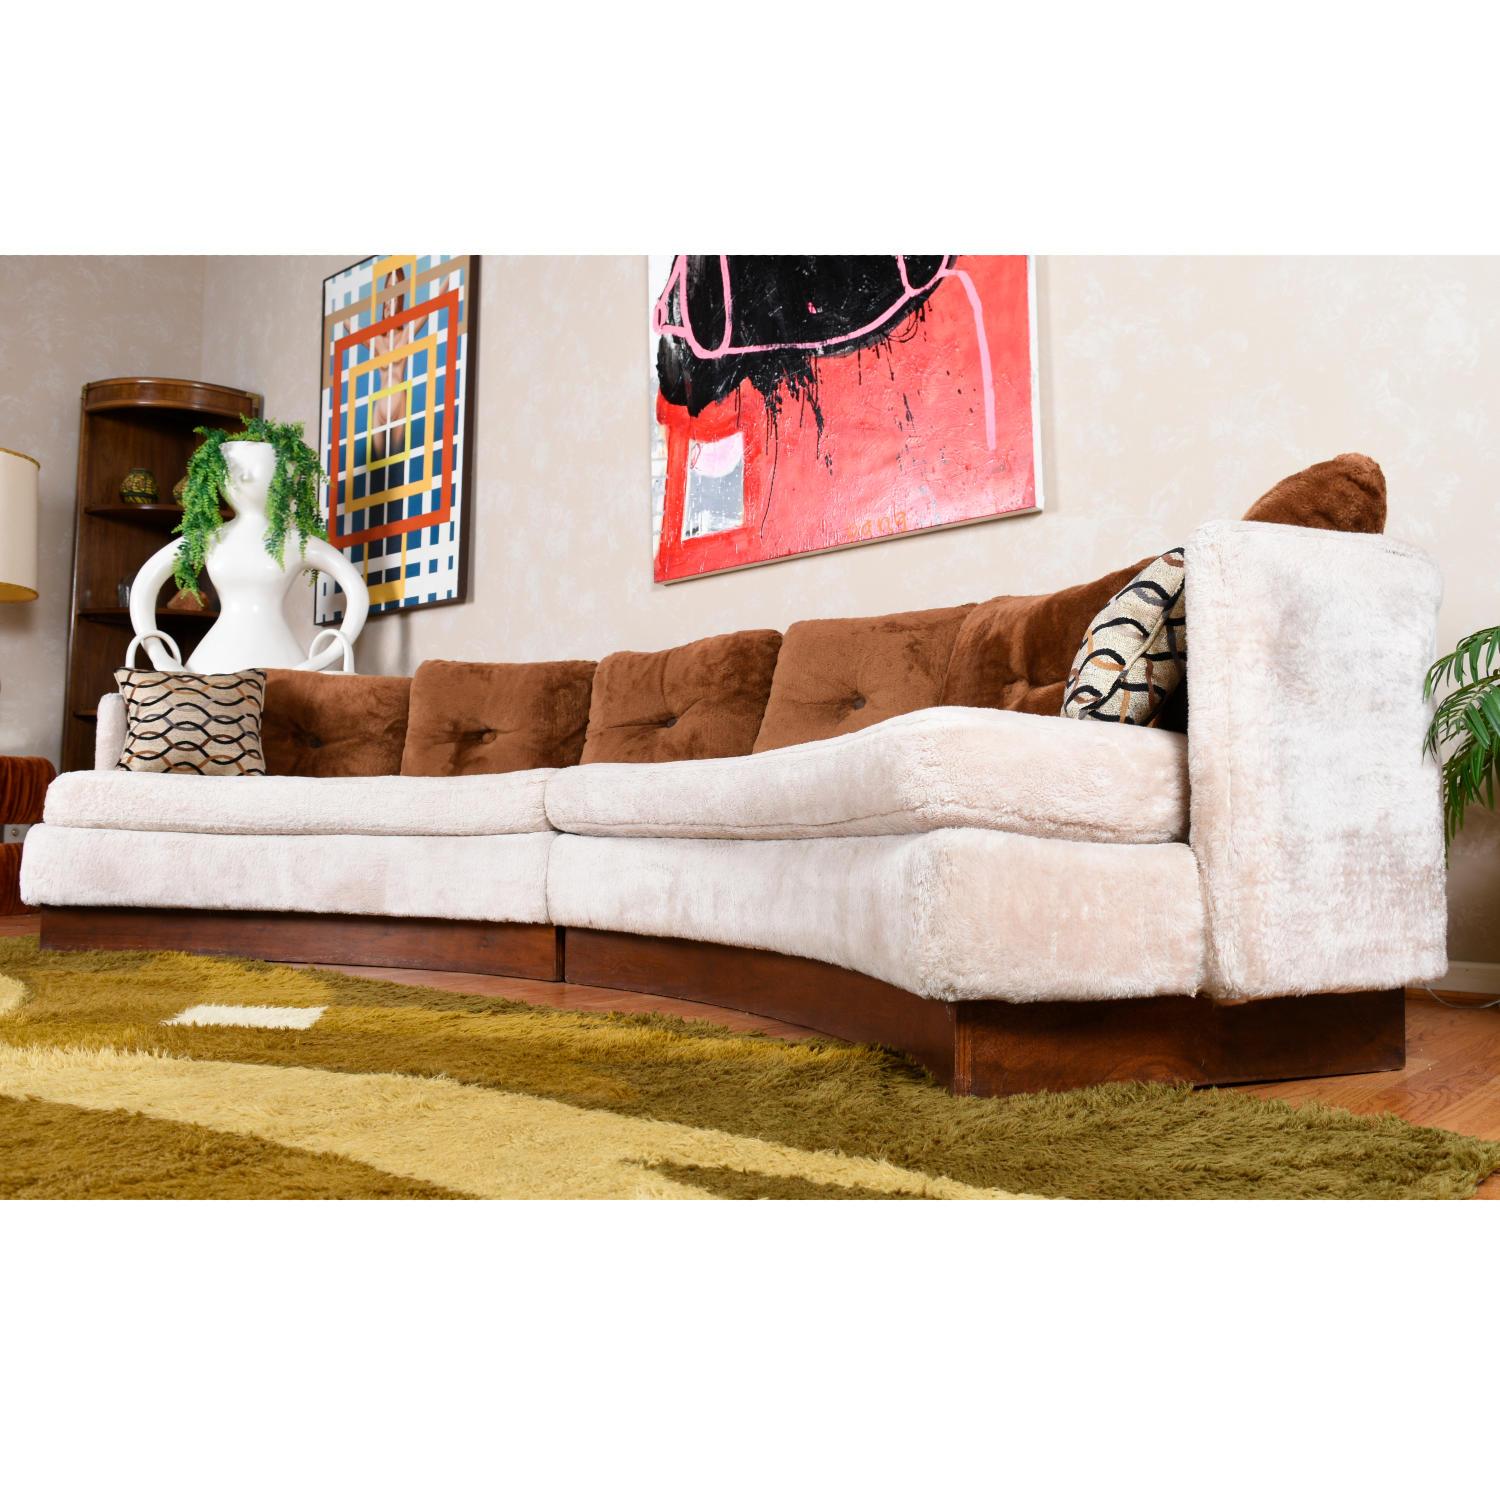 Vintage 1970s curved Mid-Century Modern crescent shaped sofa. The sofa boasts it’s original fuzzy beige and brown upholstery. Around here we call it the “Teddy Bear Sofa.” No worry for comfort with the plush pillows and fabric. Plenty of room for